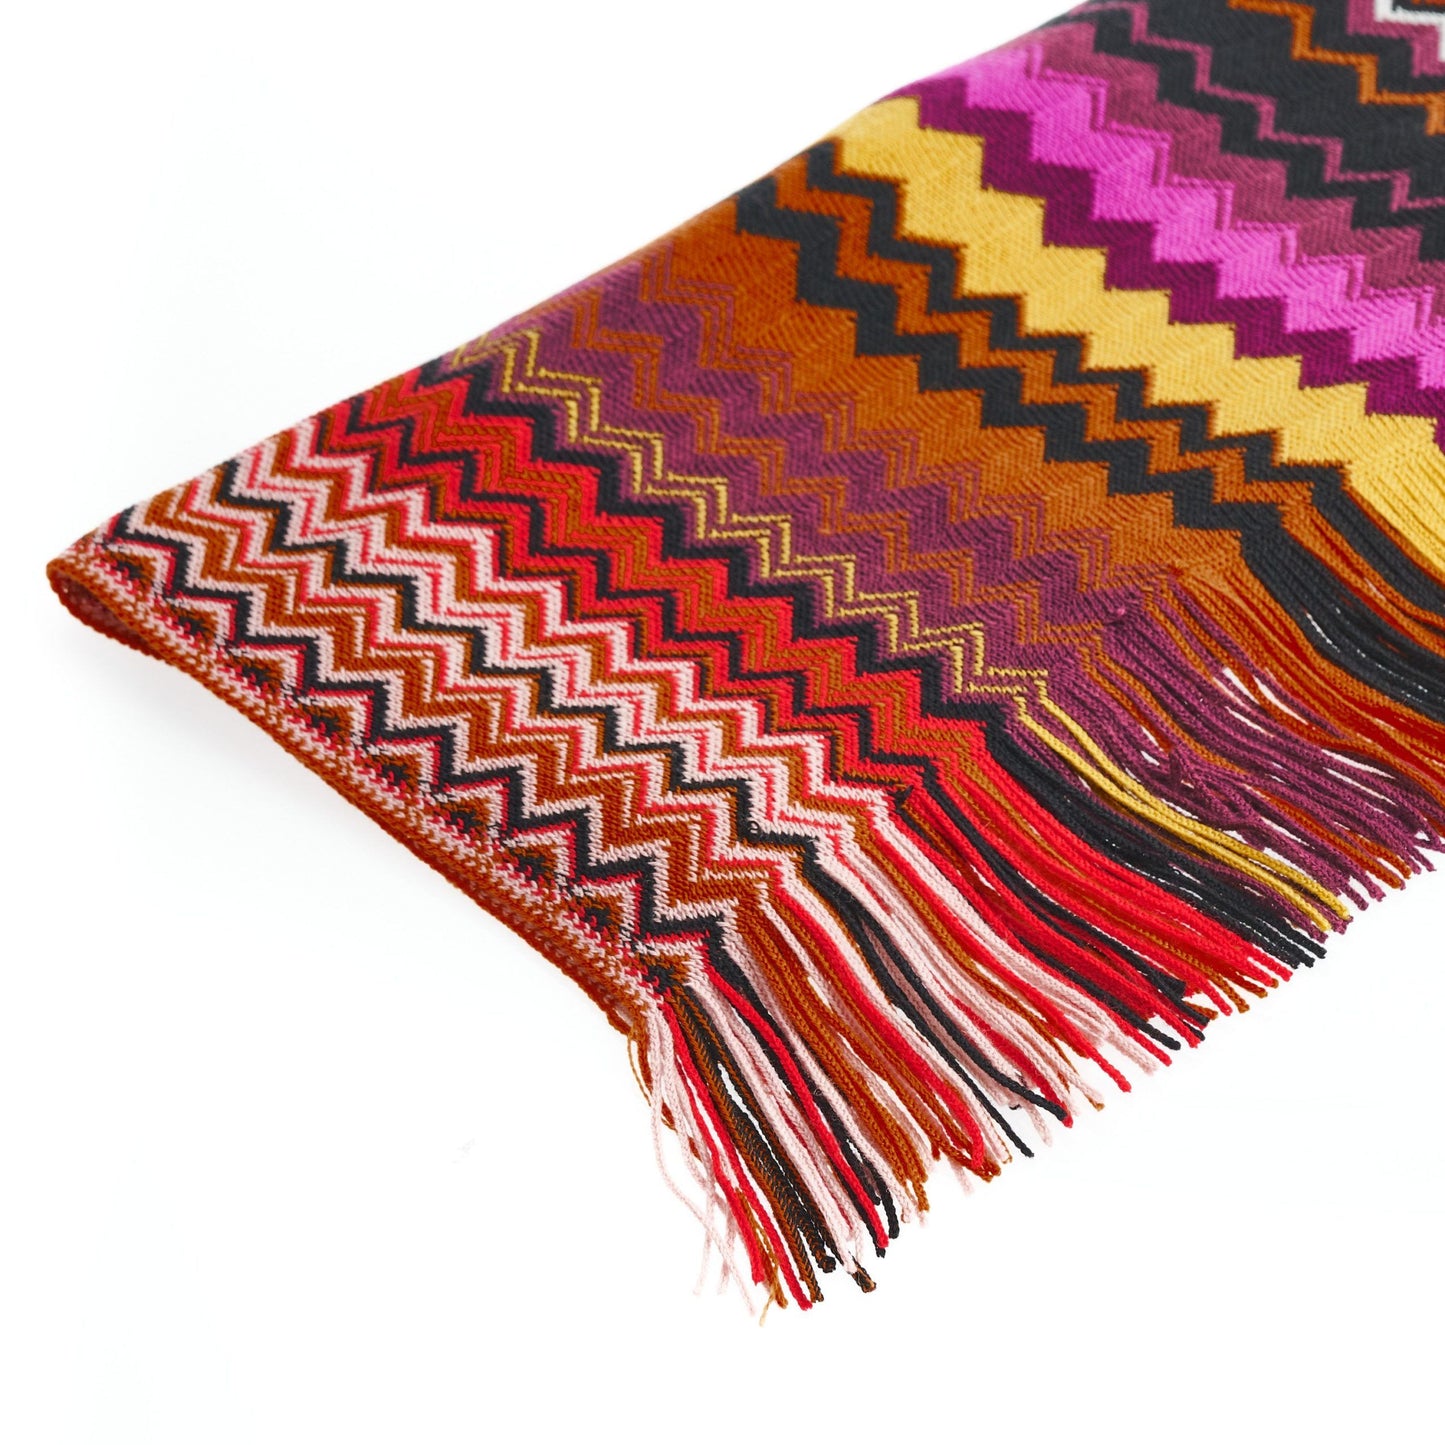 Geometric Pattern Fringed Scarf in Vibrant Hues